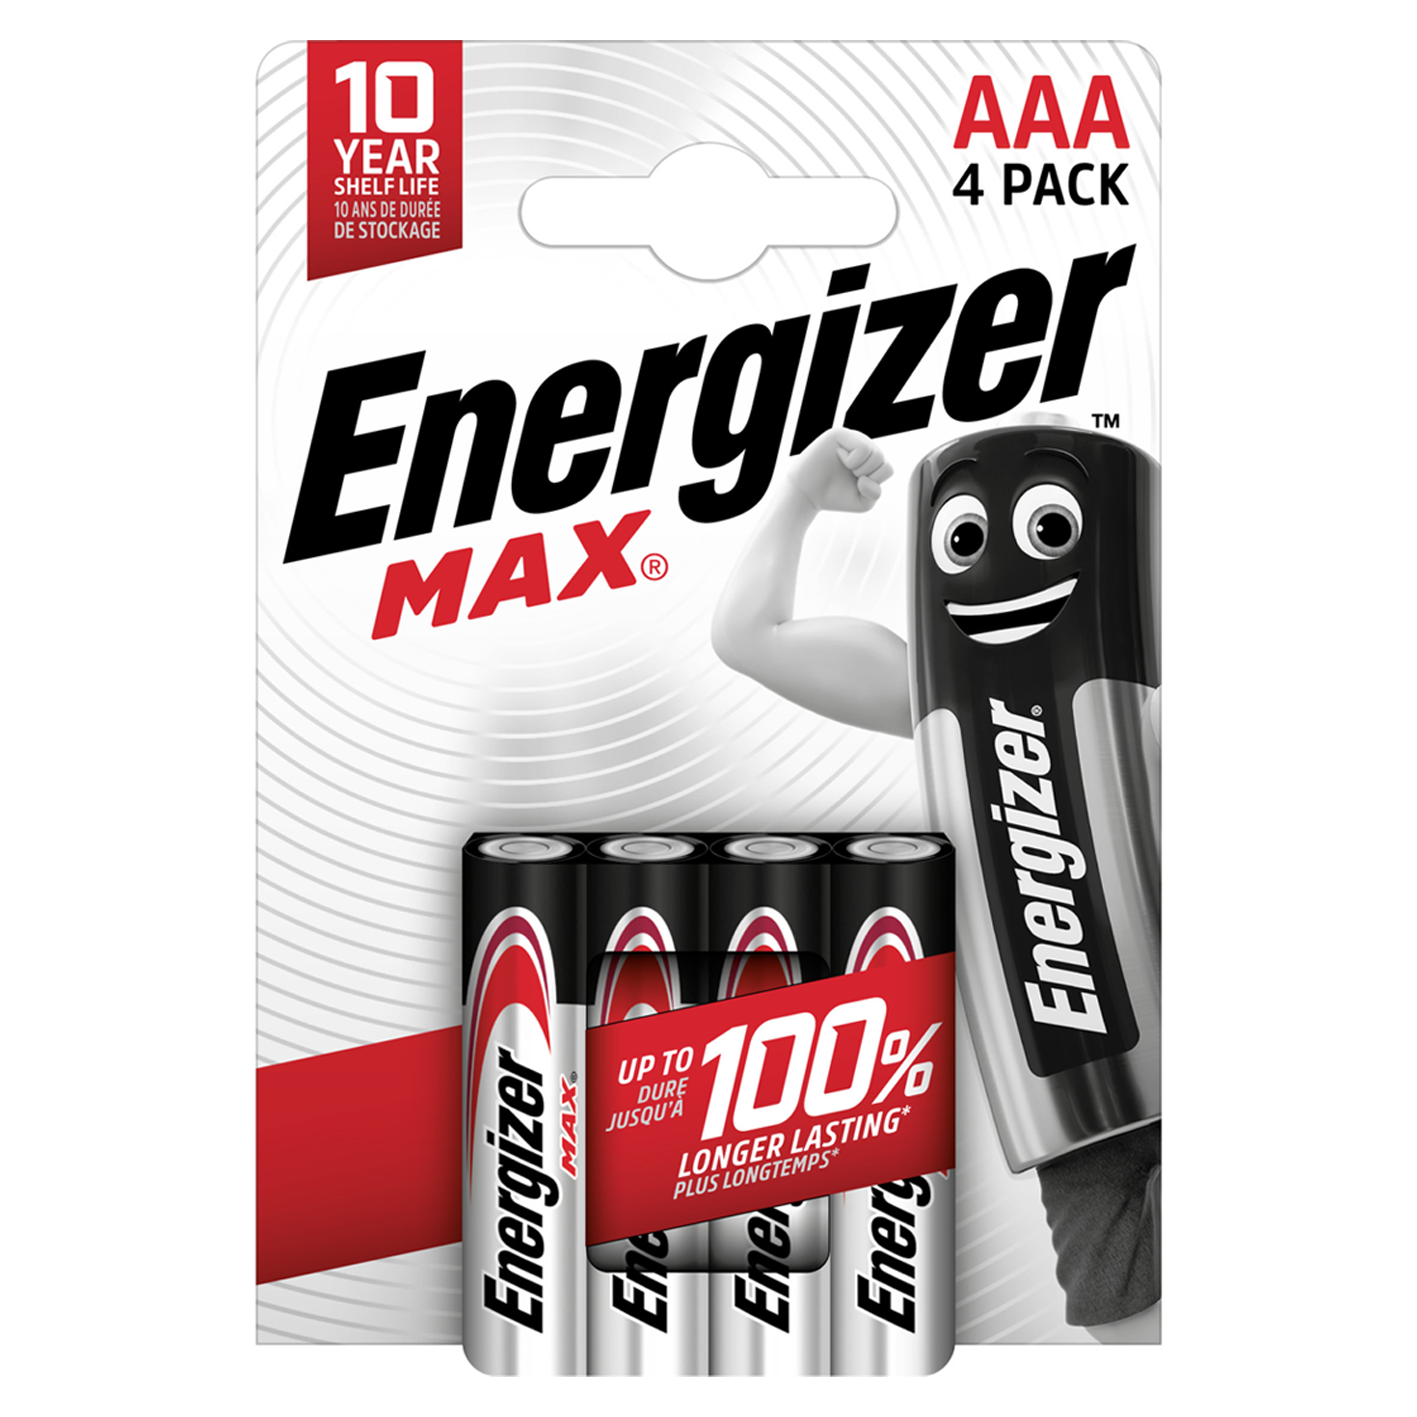 Energizer AAA Max Alkaline, Pack of 4